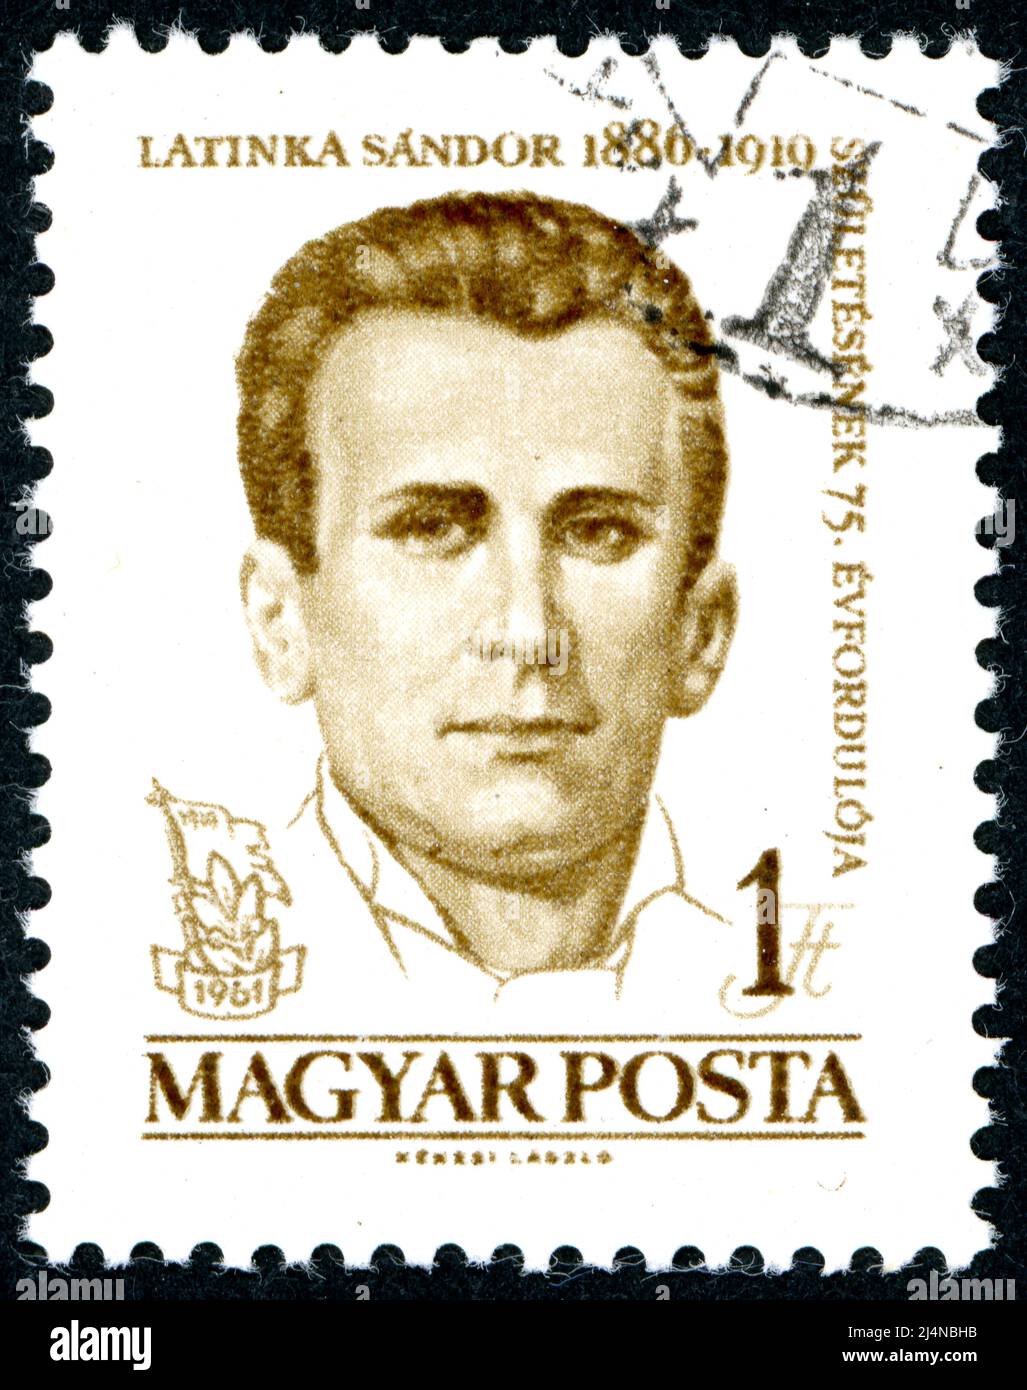 Postage stamp printed in Hungary, showing a portrait of a figure in the Hungarian communist and labor movement - Latinka Sandor, circa 1961 Stock Photo